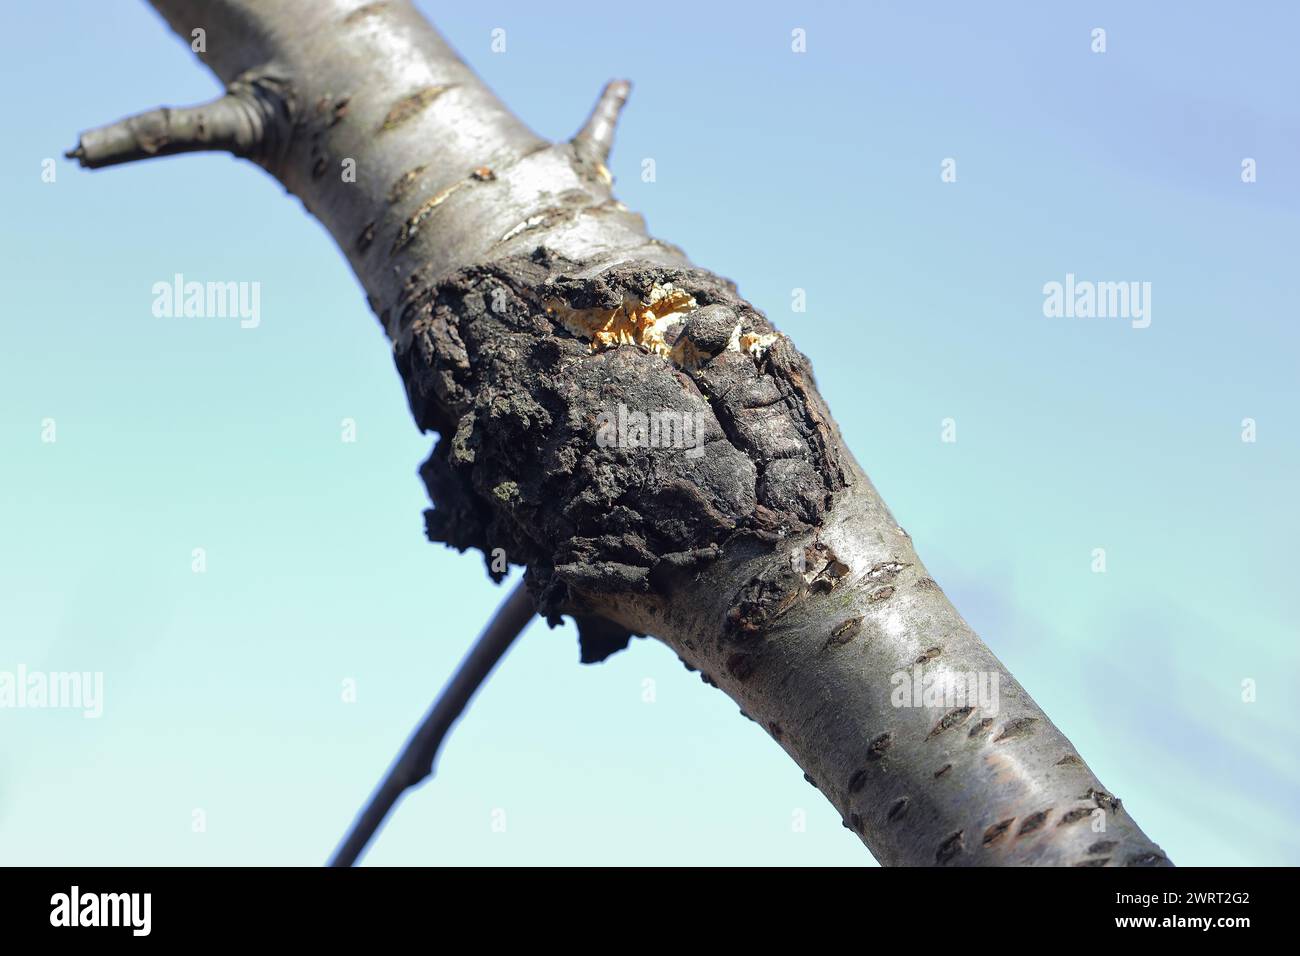 Bacterial canker of trees. Bacterial disease of fruit trees caused by Pseudomonas syringae var. syringae. Symptoms on a branch of a cherry tree. Stock Photo